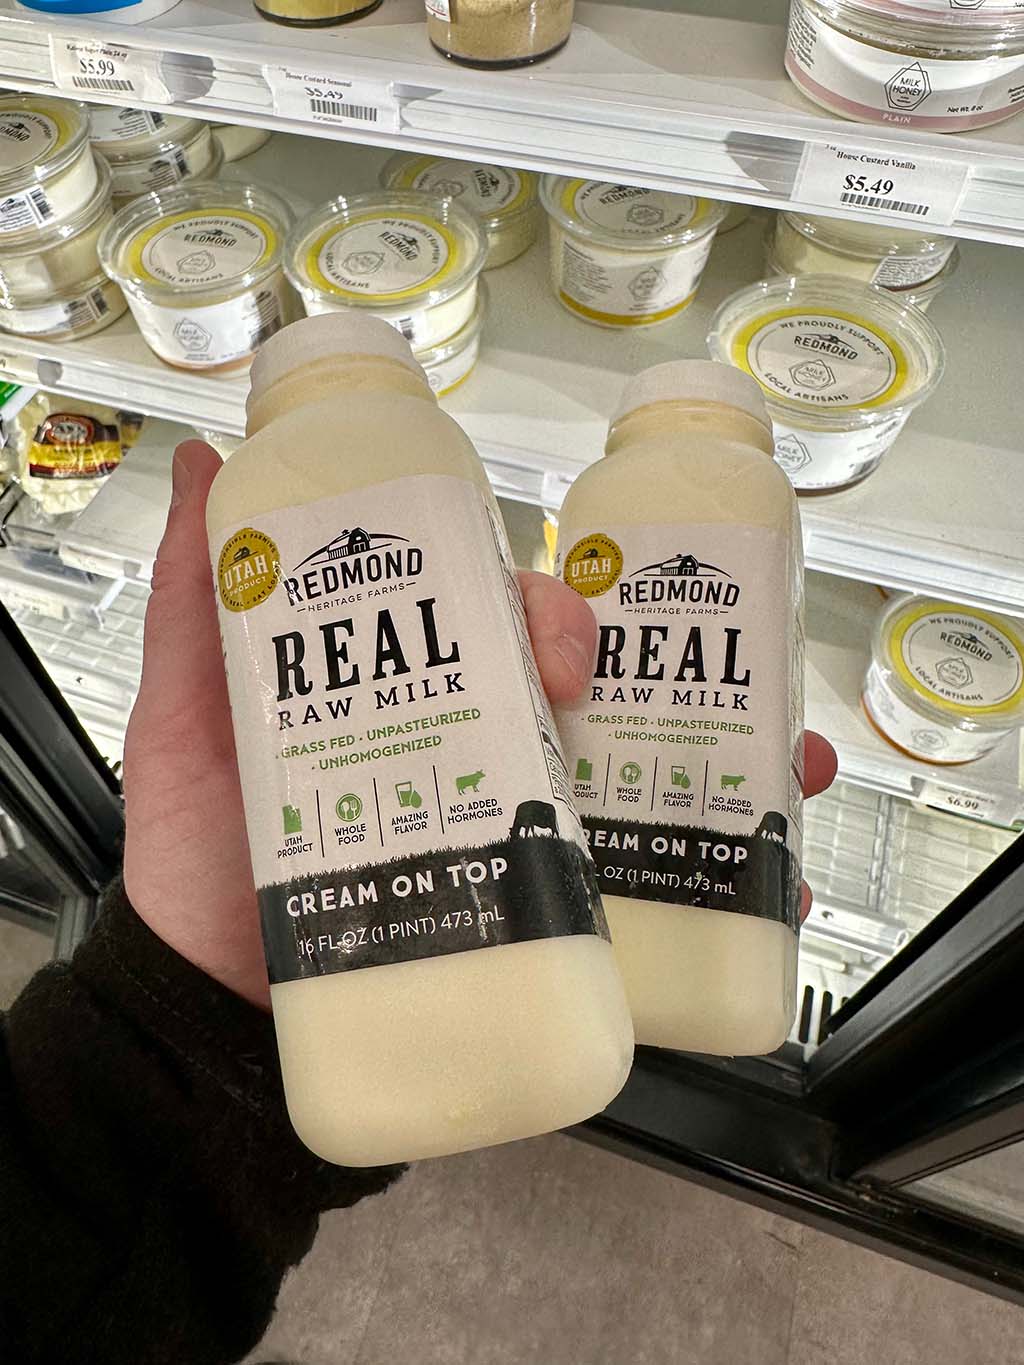 Raw milk and a meal in Salt Lake City